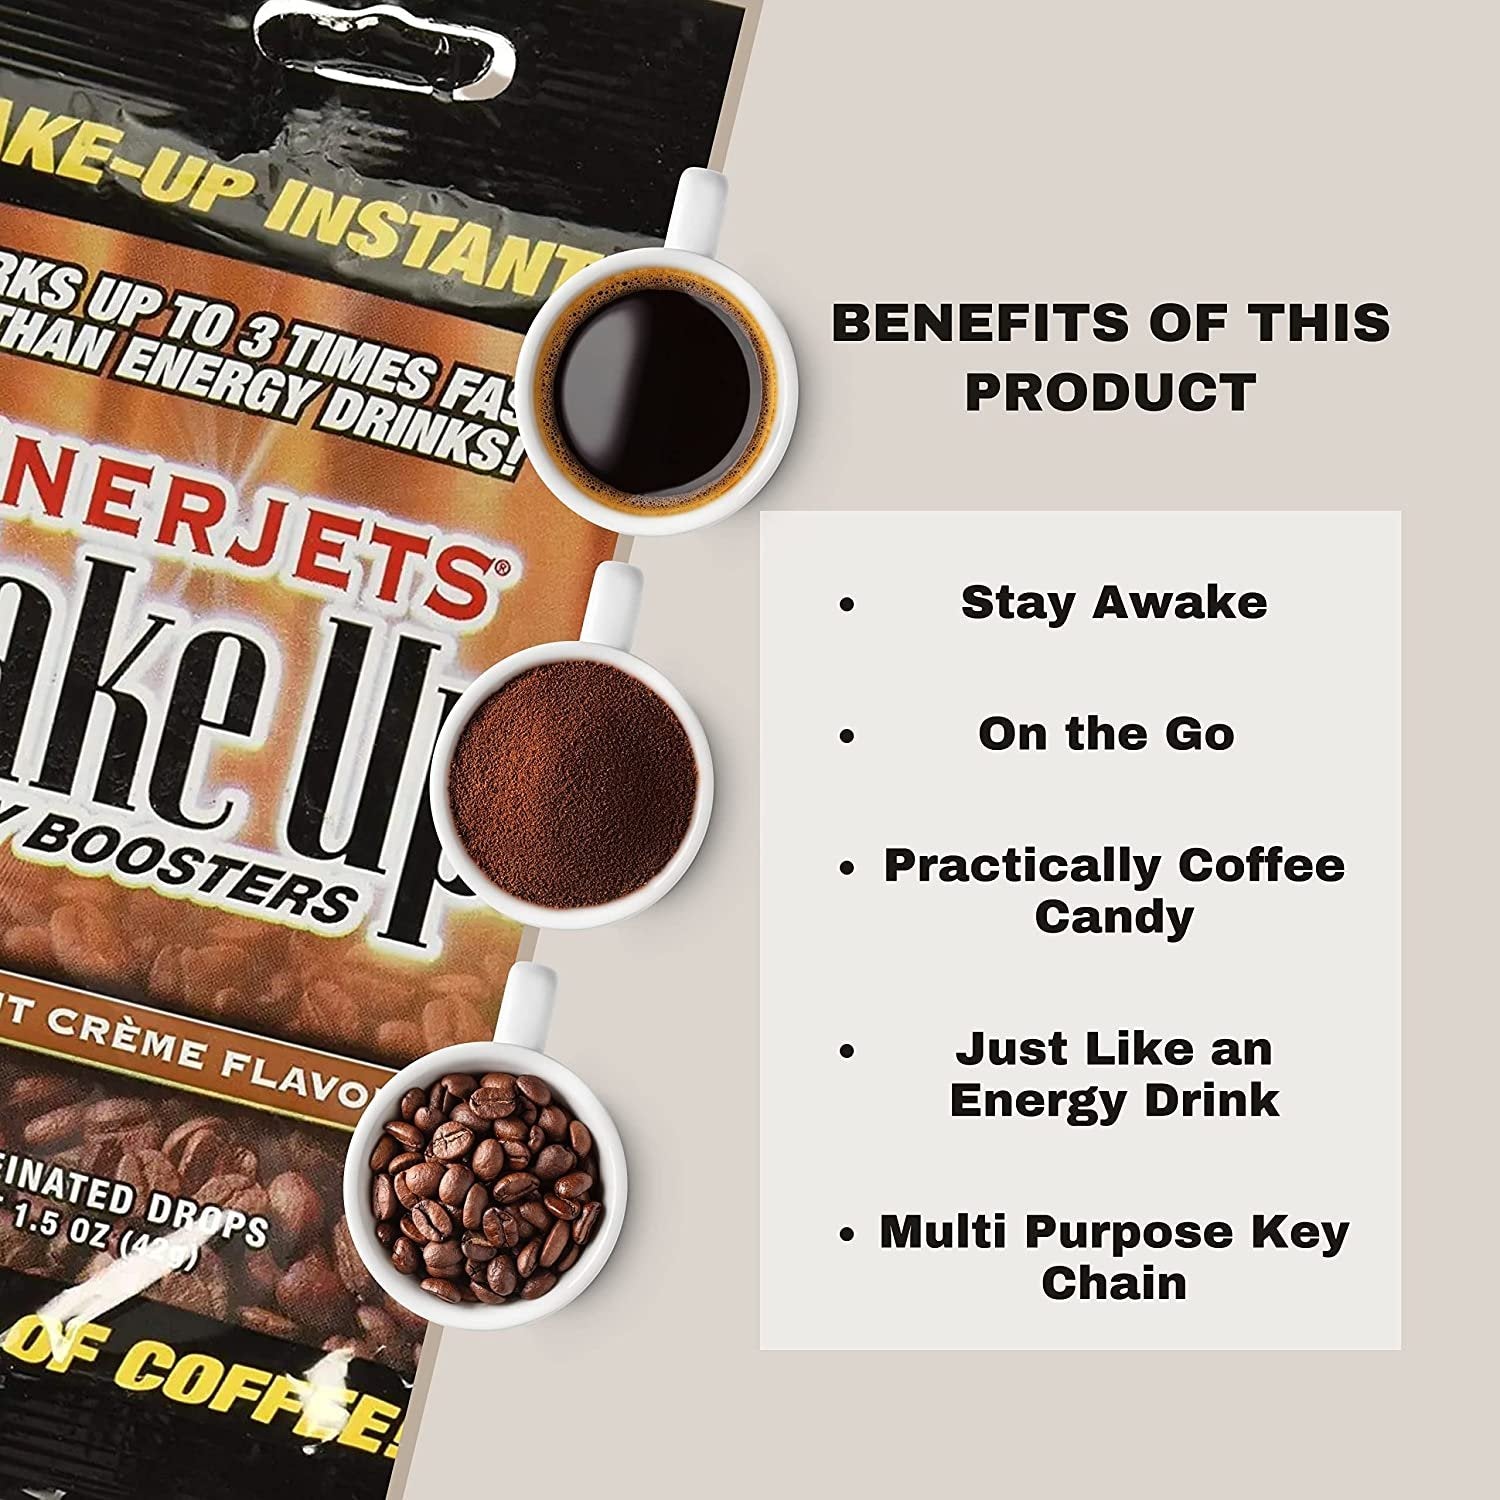 Enerjets Wake Up Energy Booster Caffeinated Drops - Instant Coffee Energy Supplements - Hazelnut Creme Flavor - Pack of 6, 12 Drops Per Package with Worldwide Nutrition Multi Purpose Key Chain